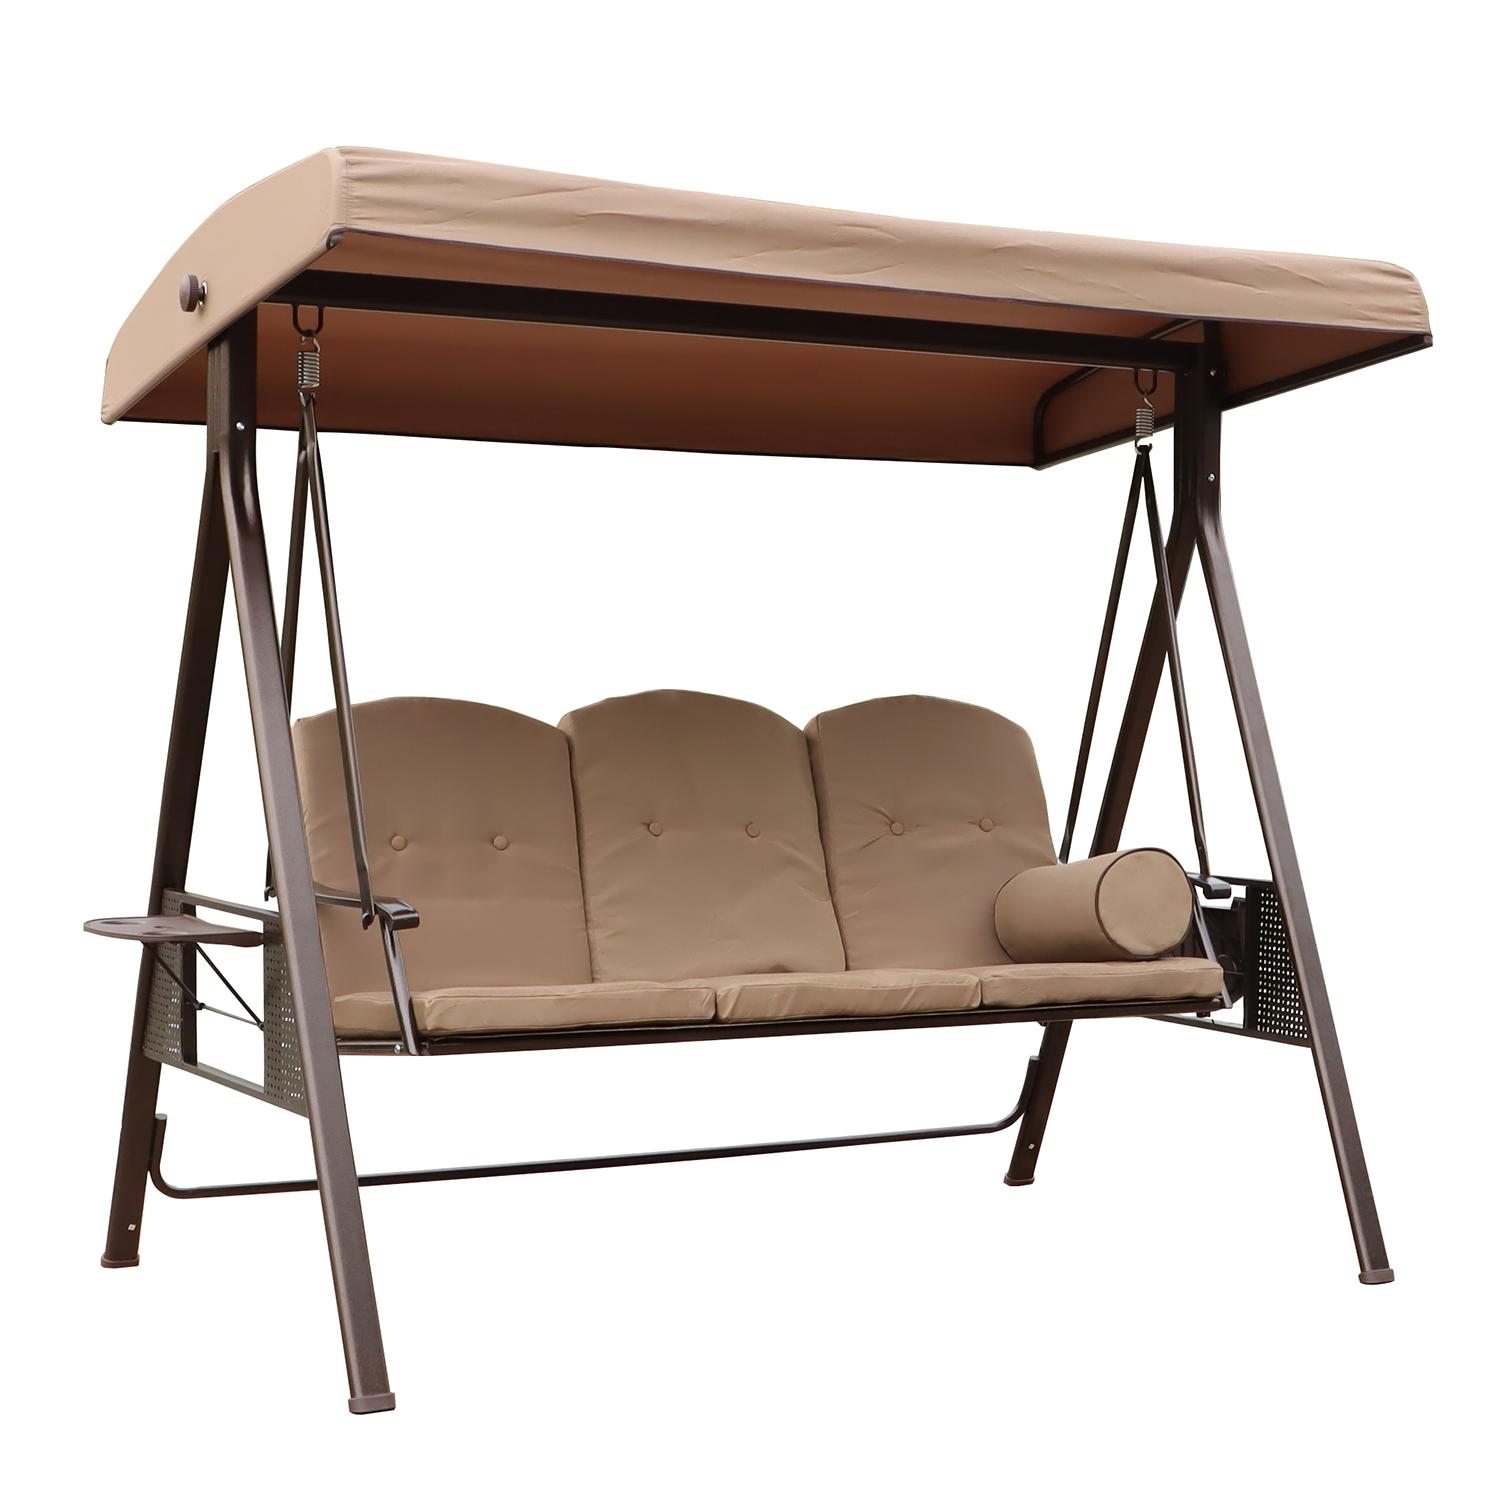 Leisure 3-Seat Patio Swing Glider Outdoor Canopy with Removable Cushions and Pillows for Backyard, Adjustable Shade Chair Hammock Lounge Chair Porch Garden with Side Tray and Steel Frame - Beige - image 2 of 8